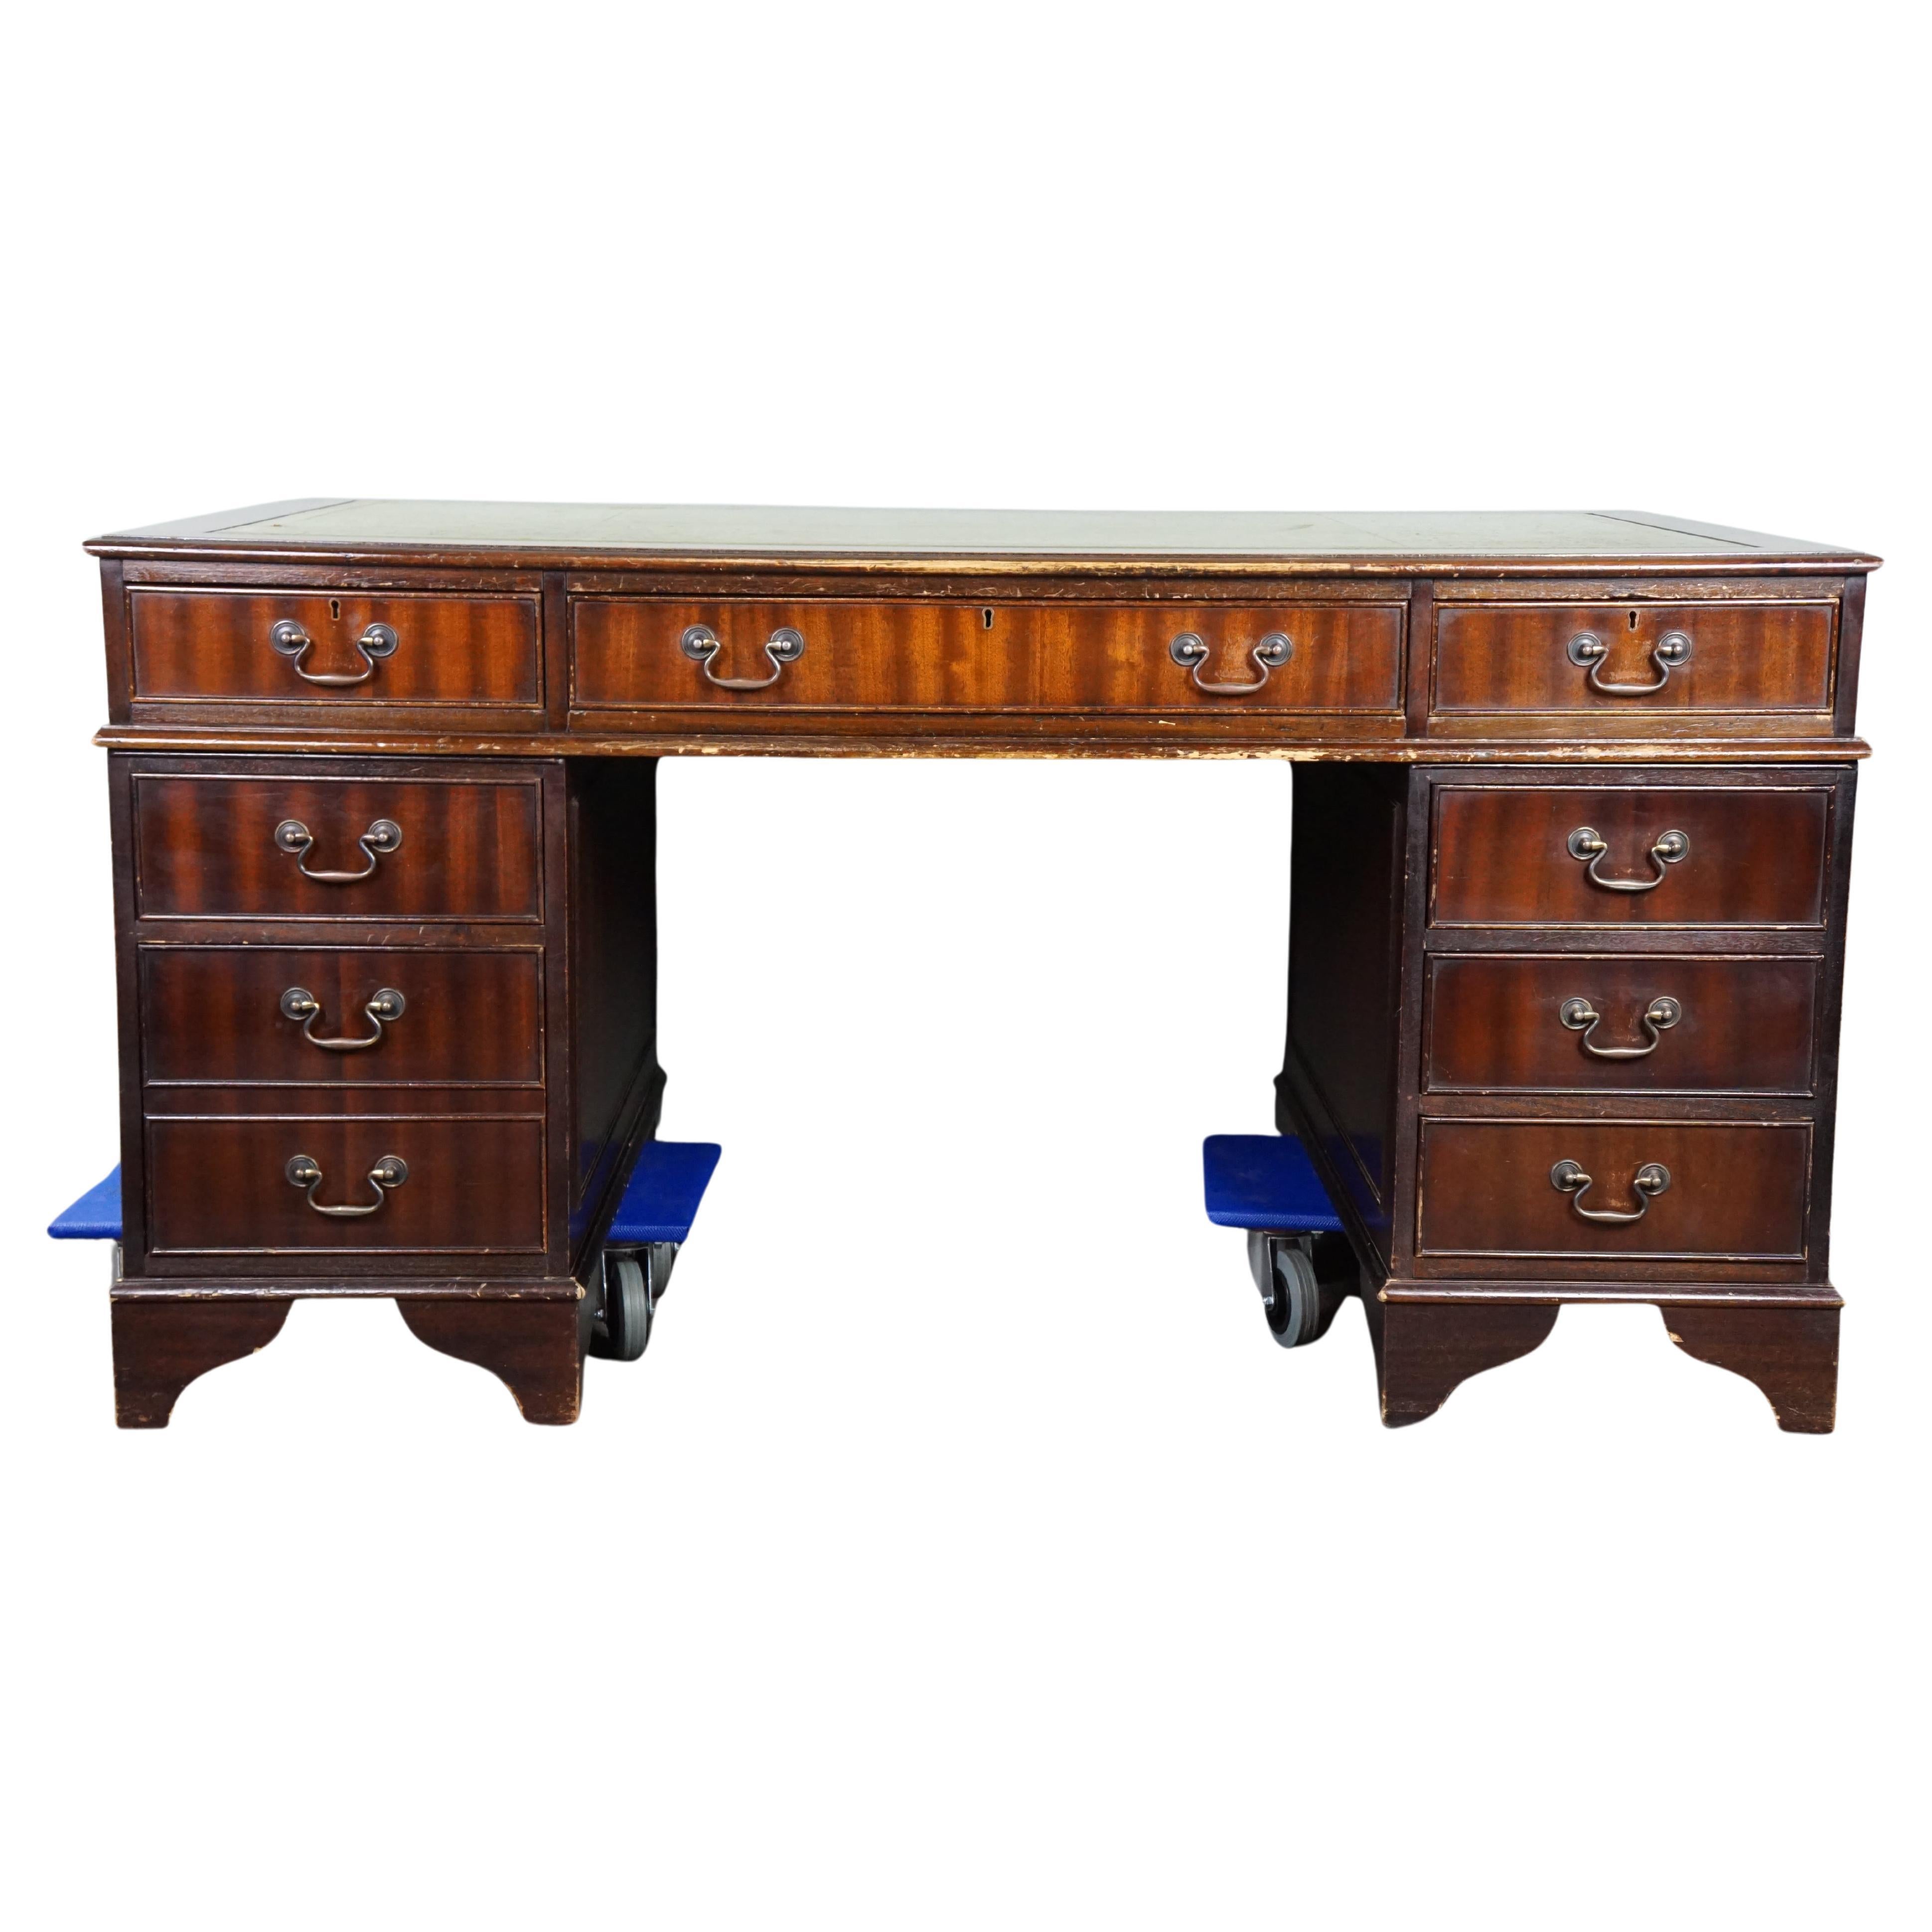  English style Chesterfield desk inlaid with green leather For Sale